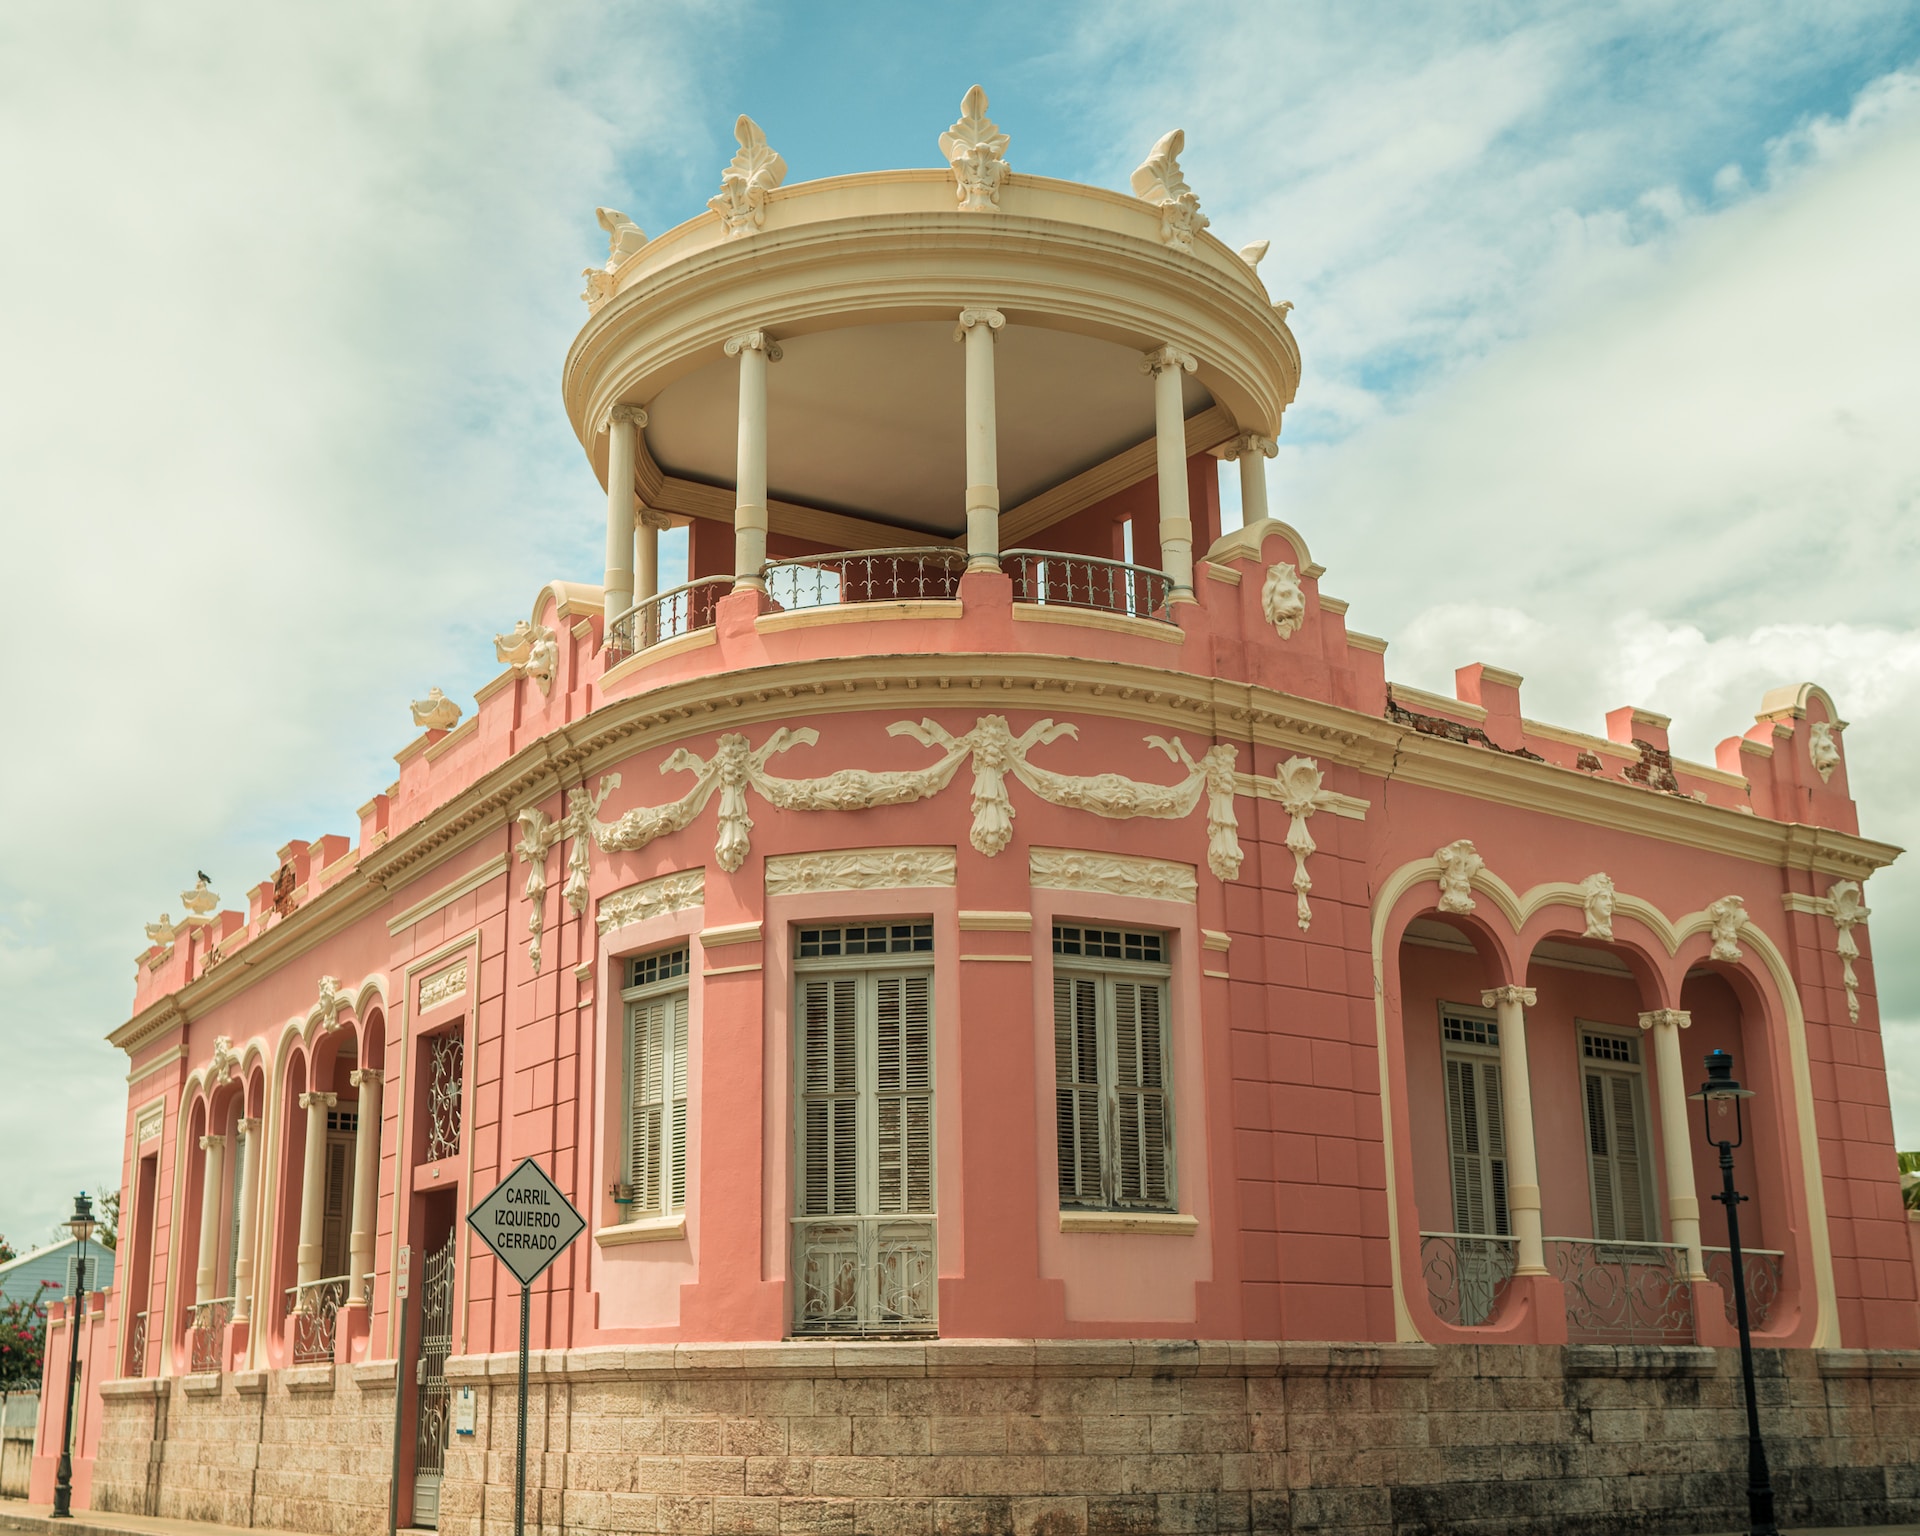 A historic building in Ponce, Puerto Rico.